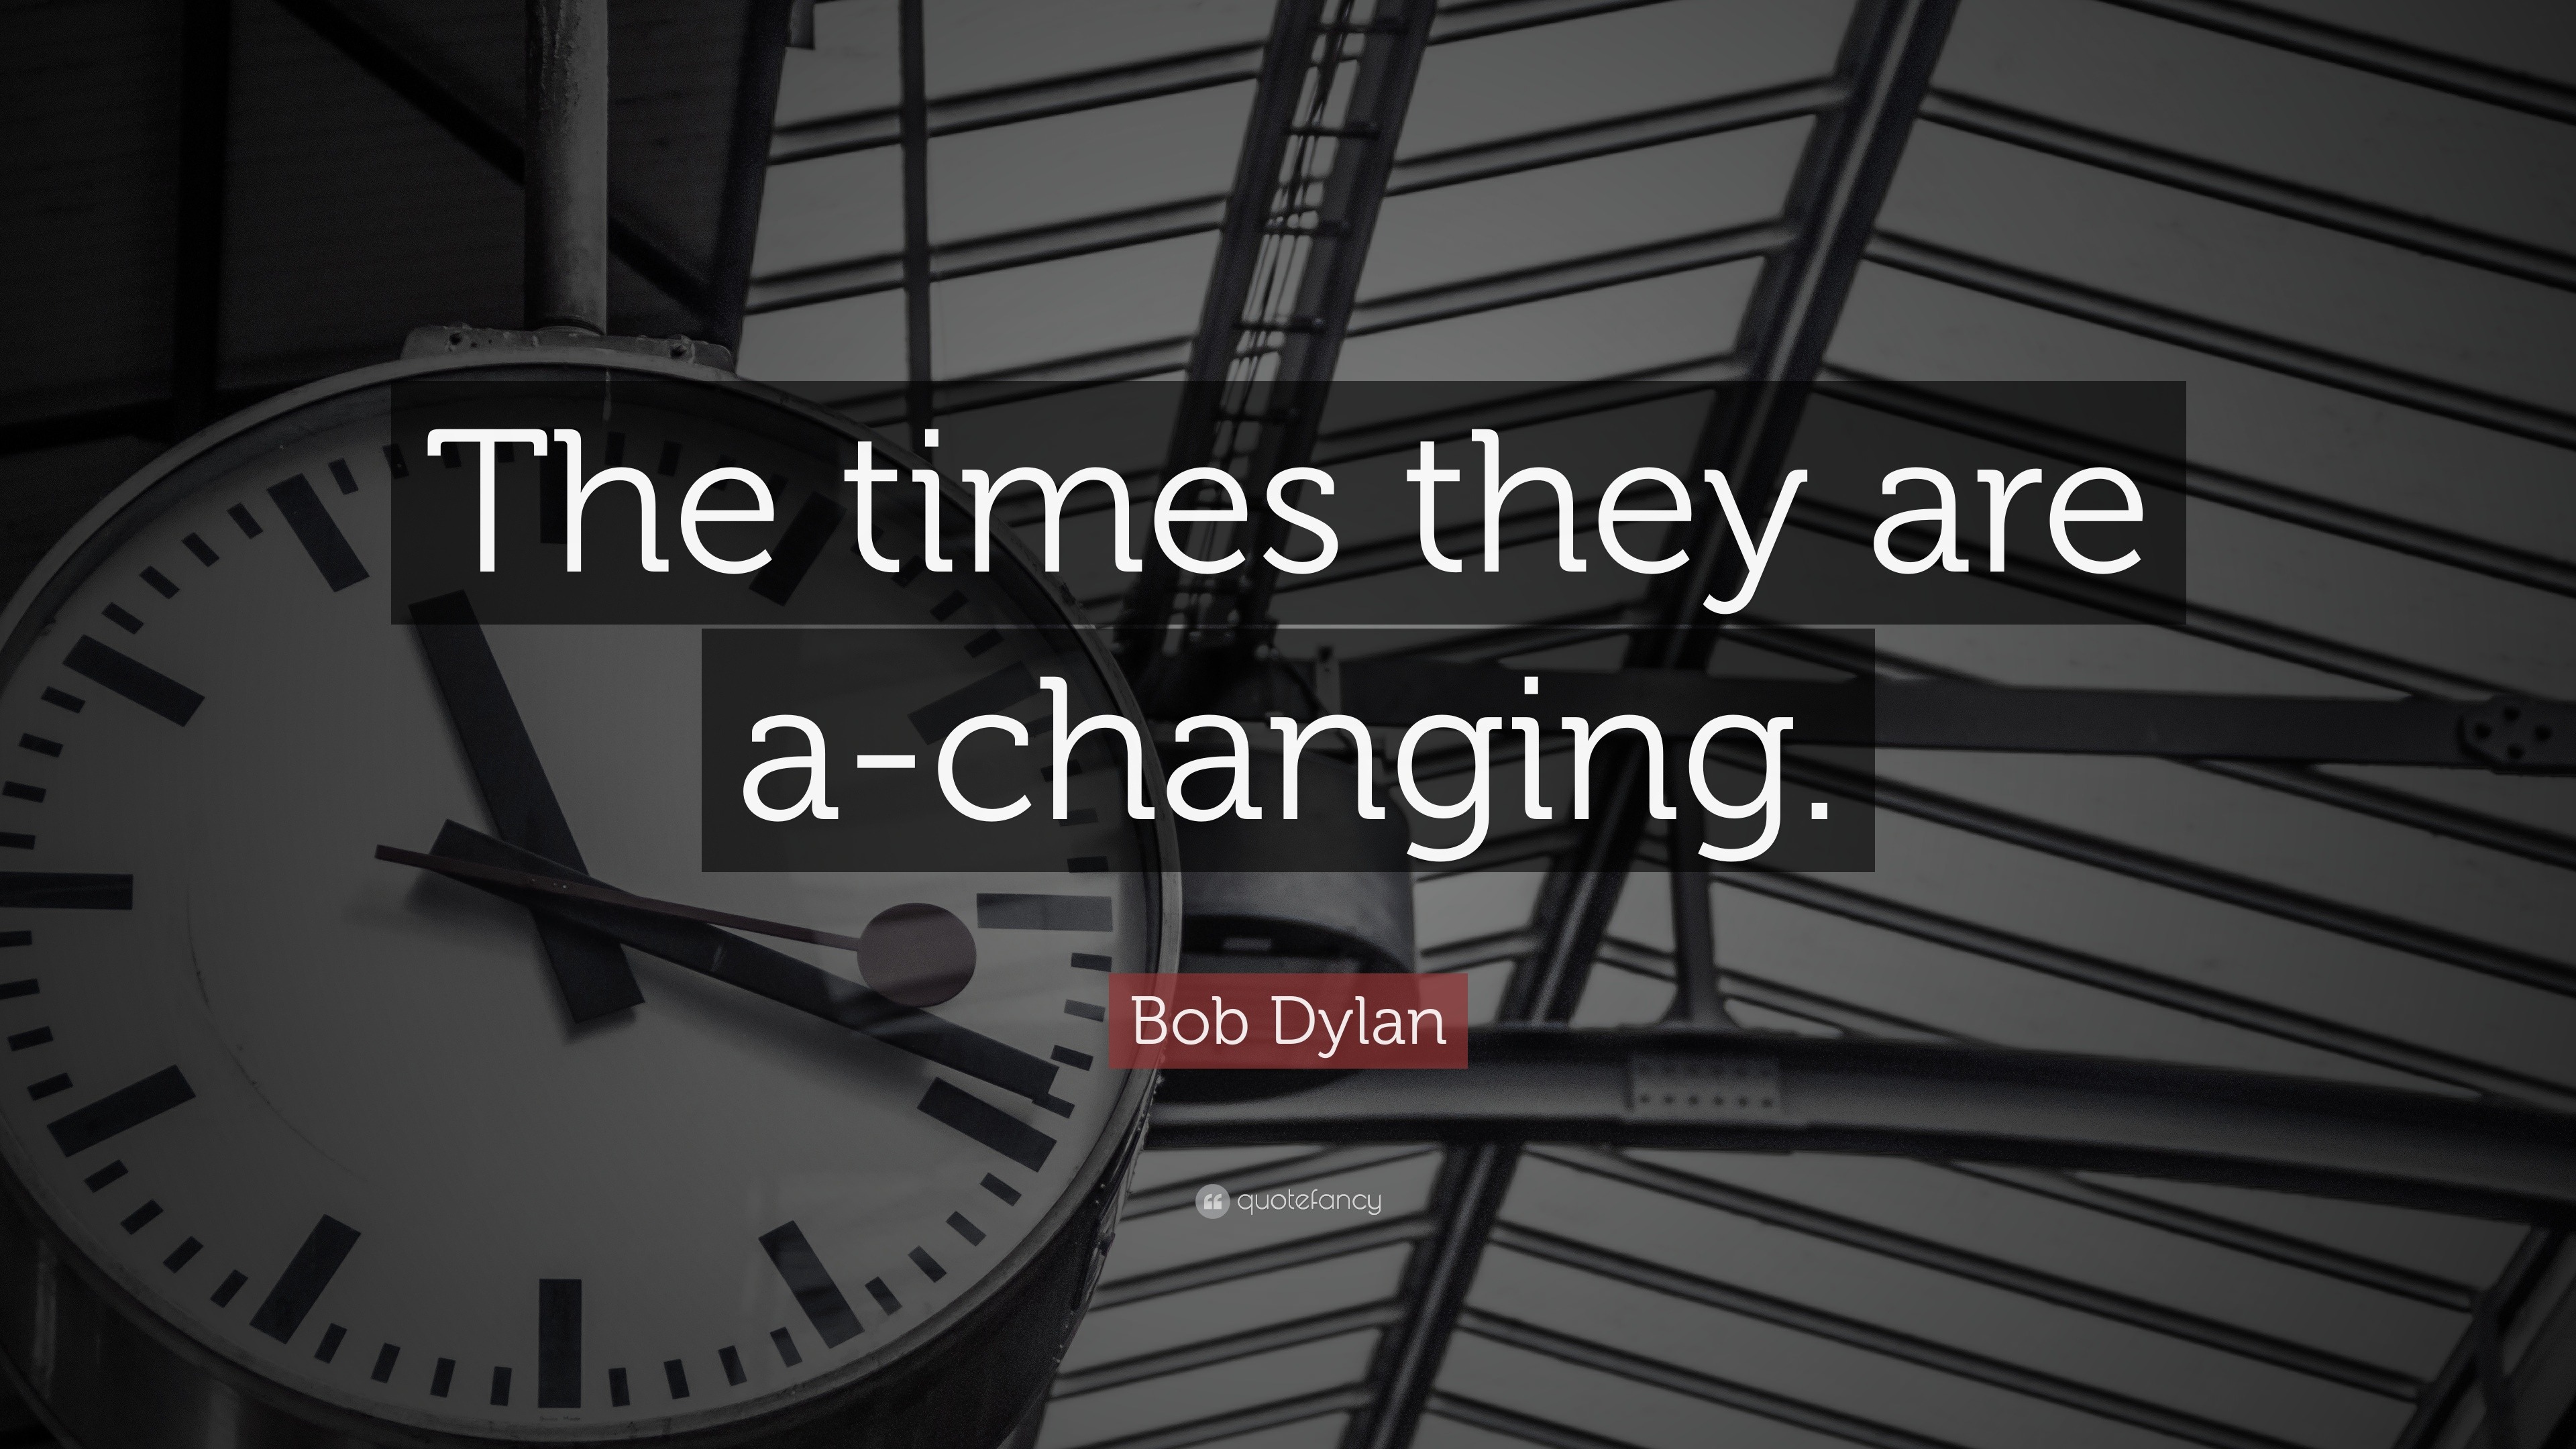 Bob Dylan Quote: “The times they are a-changing.”